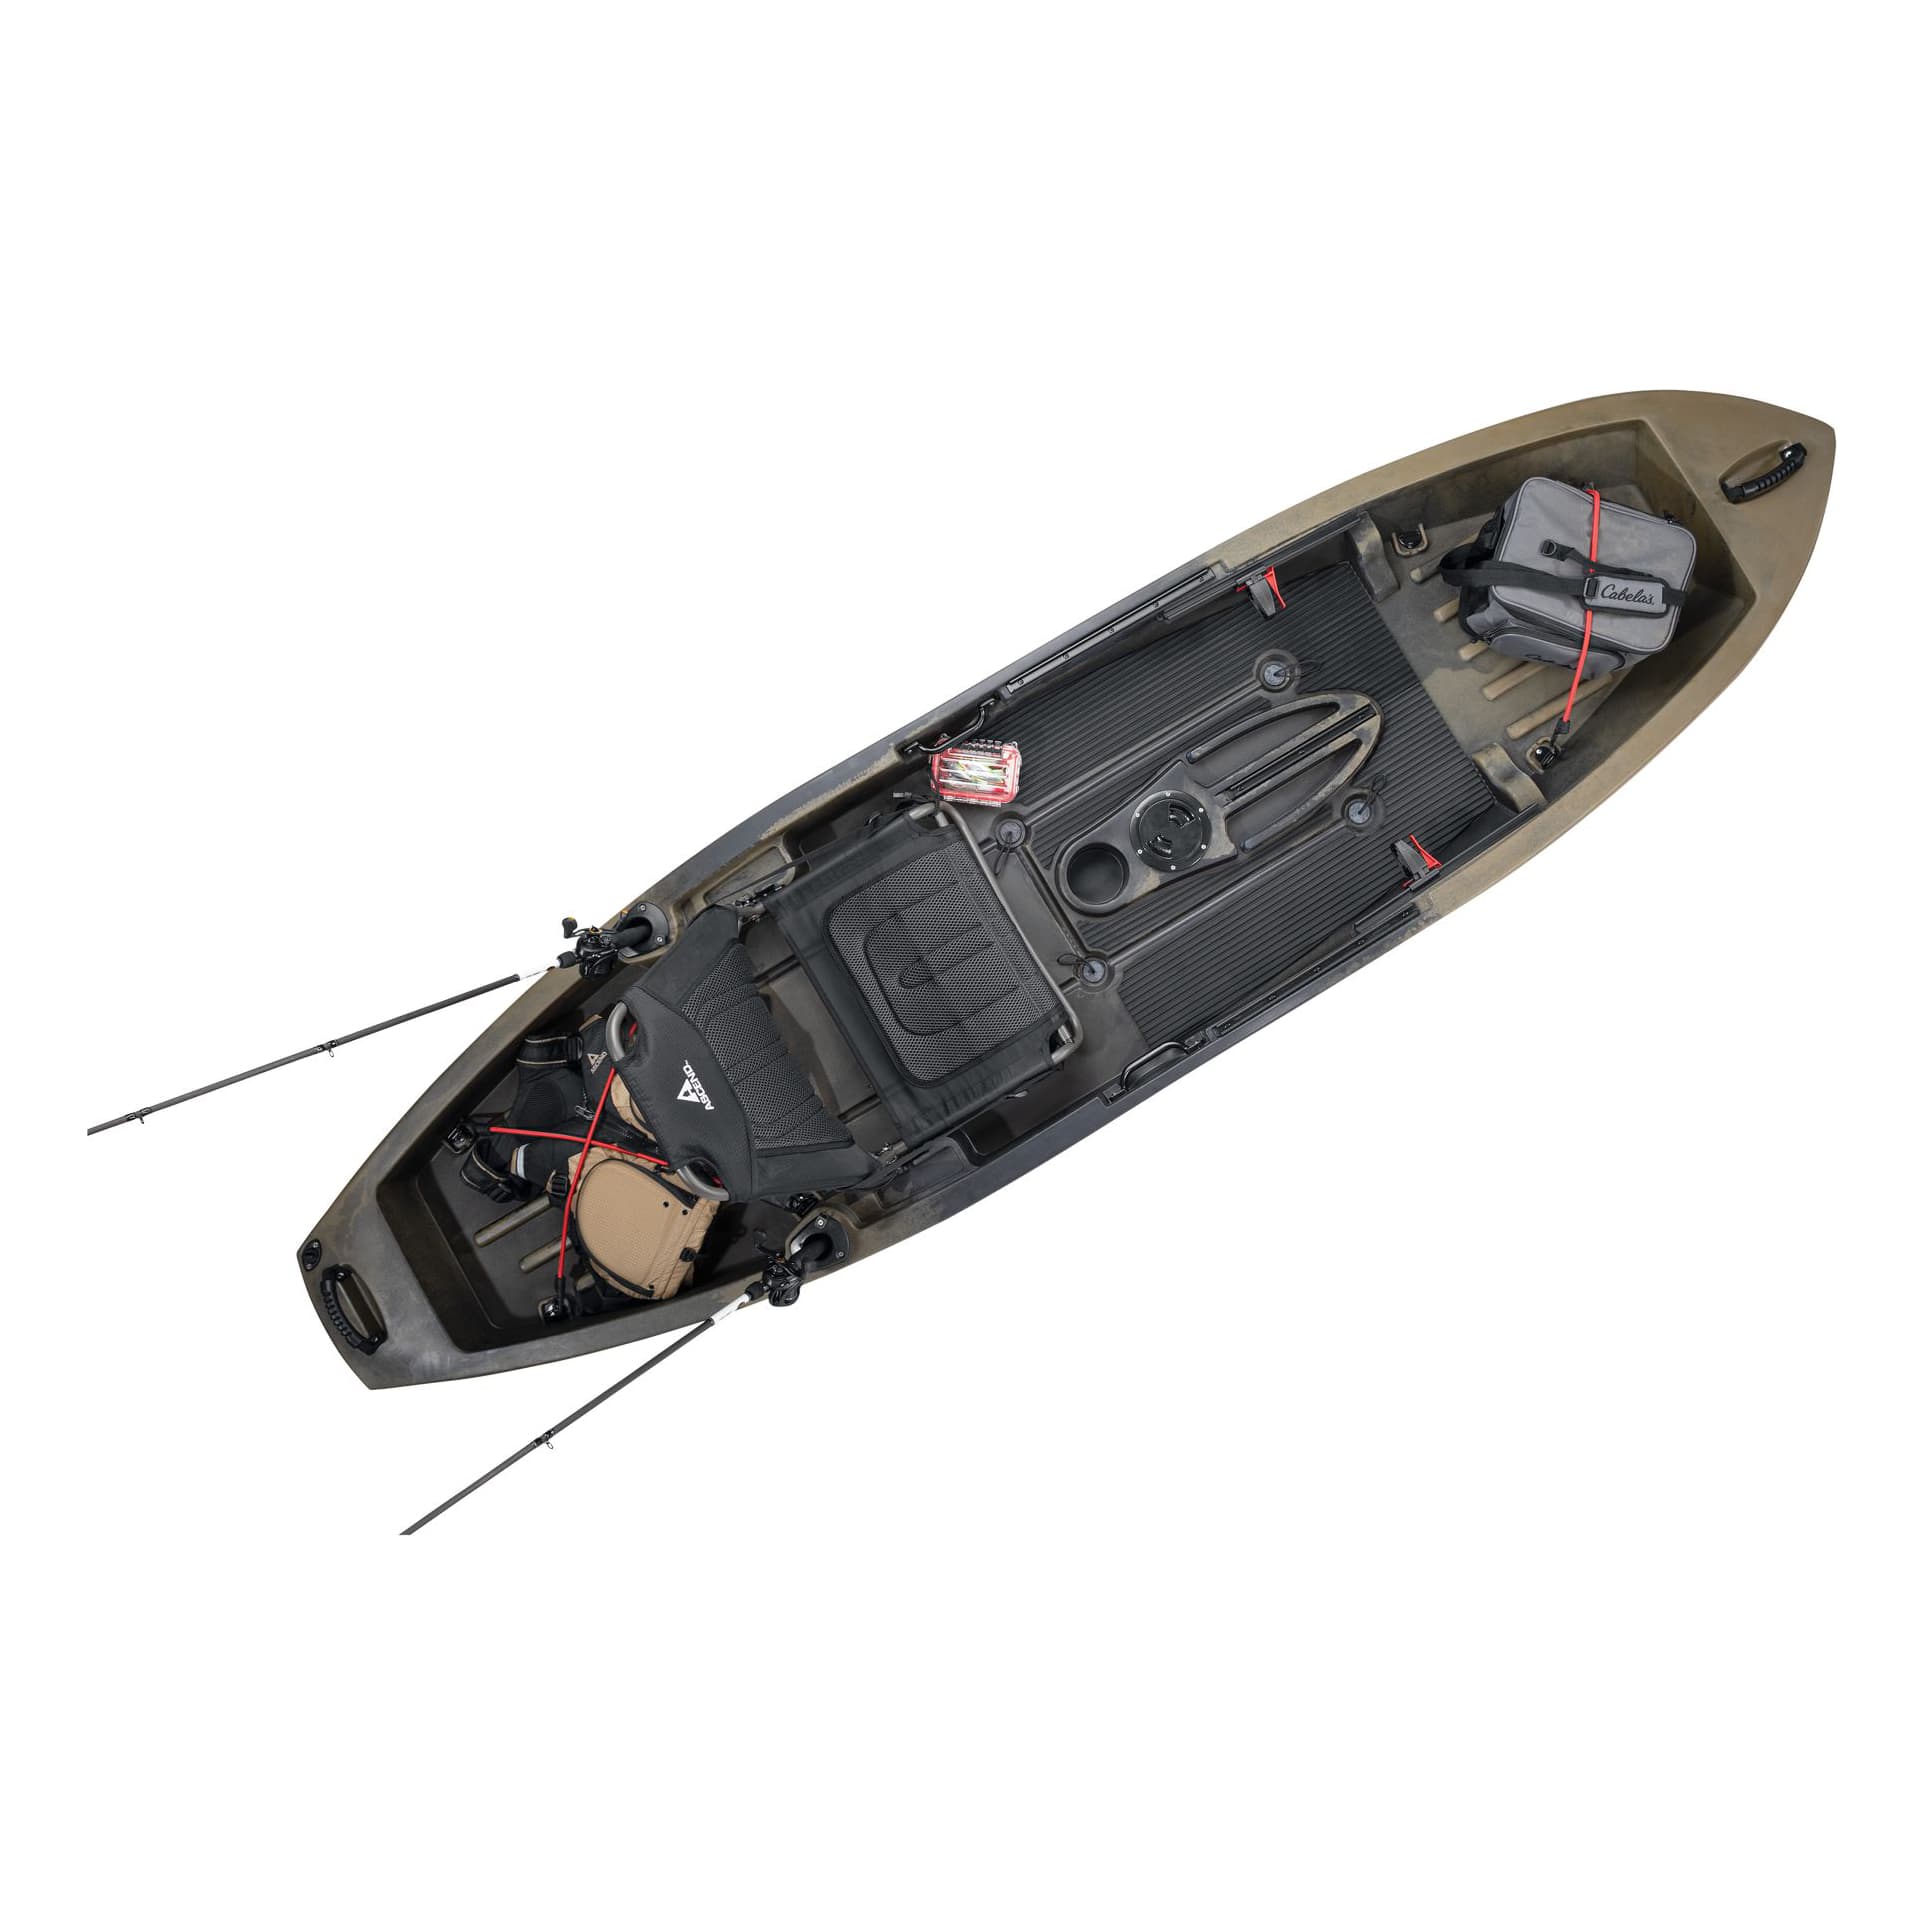 Ascend® 10T Sit-On-Top Kayak with Enhanced Seating System - Camo - In the Field